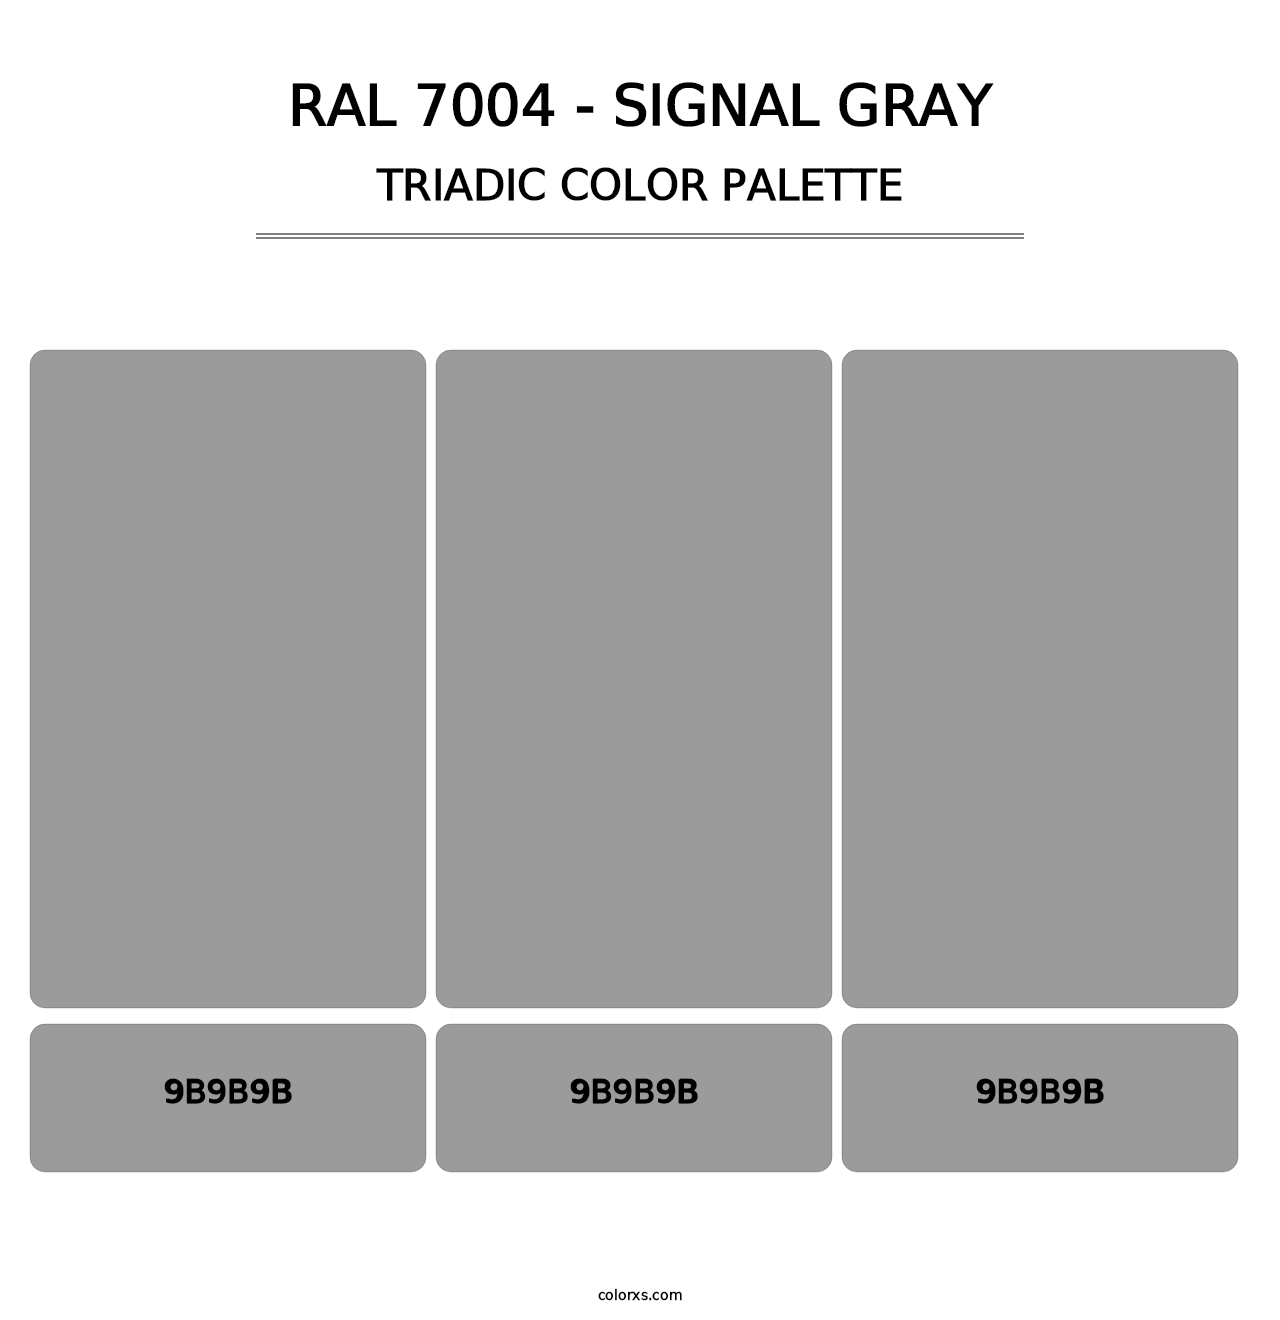 RAL 7004 - Signal Gray - Triadic Color Palette